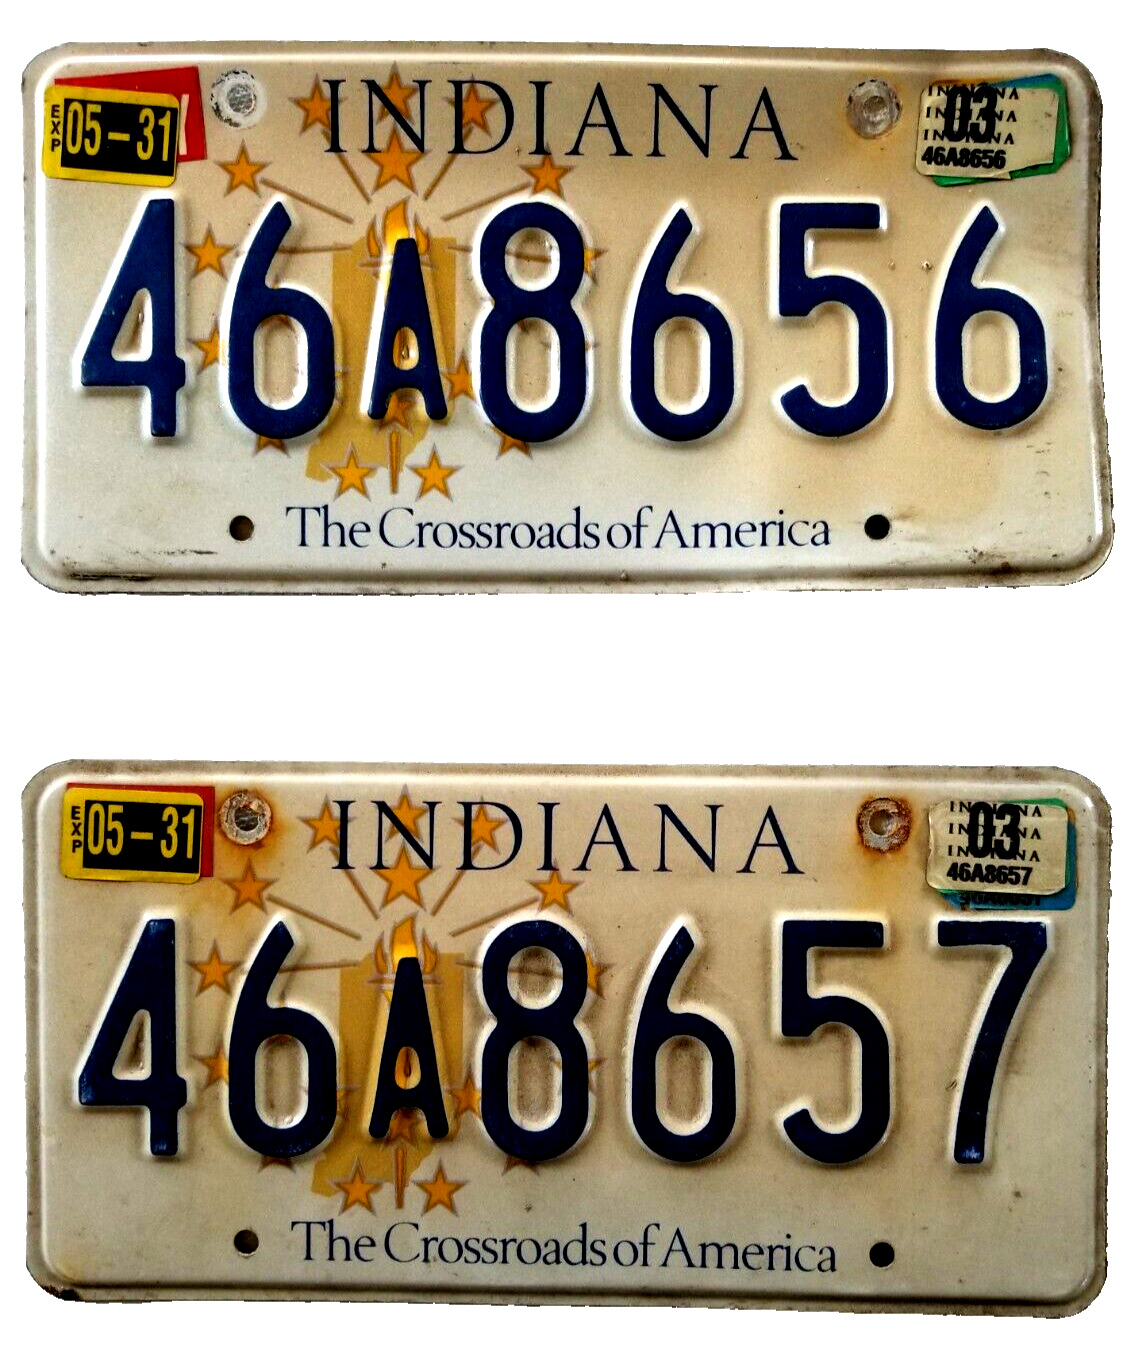 Consecutive Metal 2003 Indiana Expired License Plates 46A8656/46A8657 Crossroads